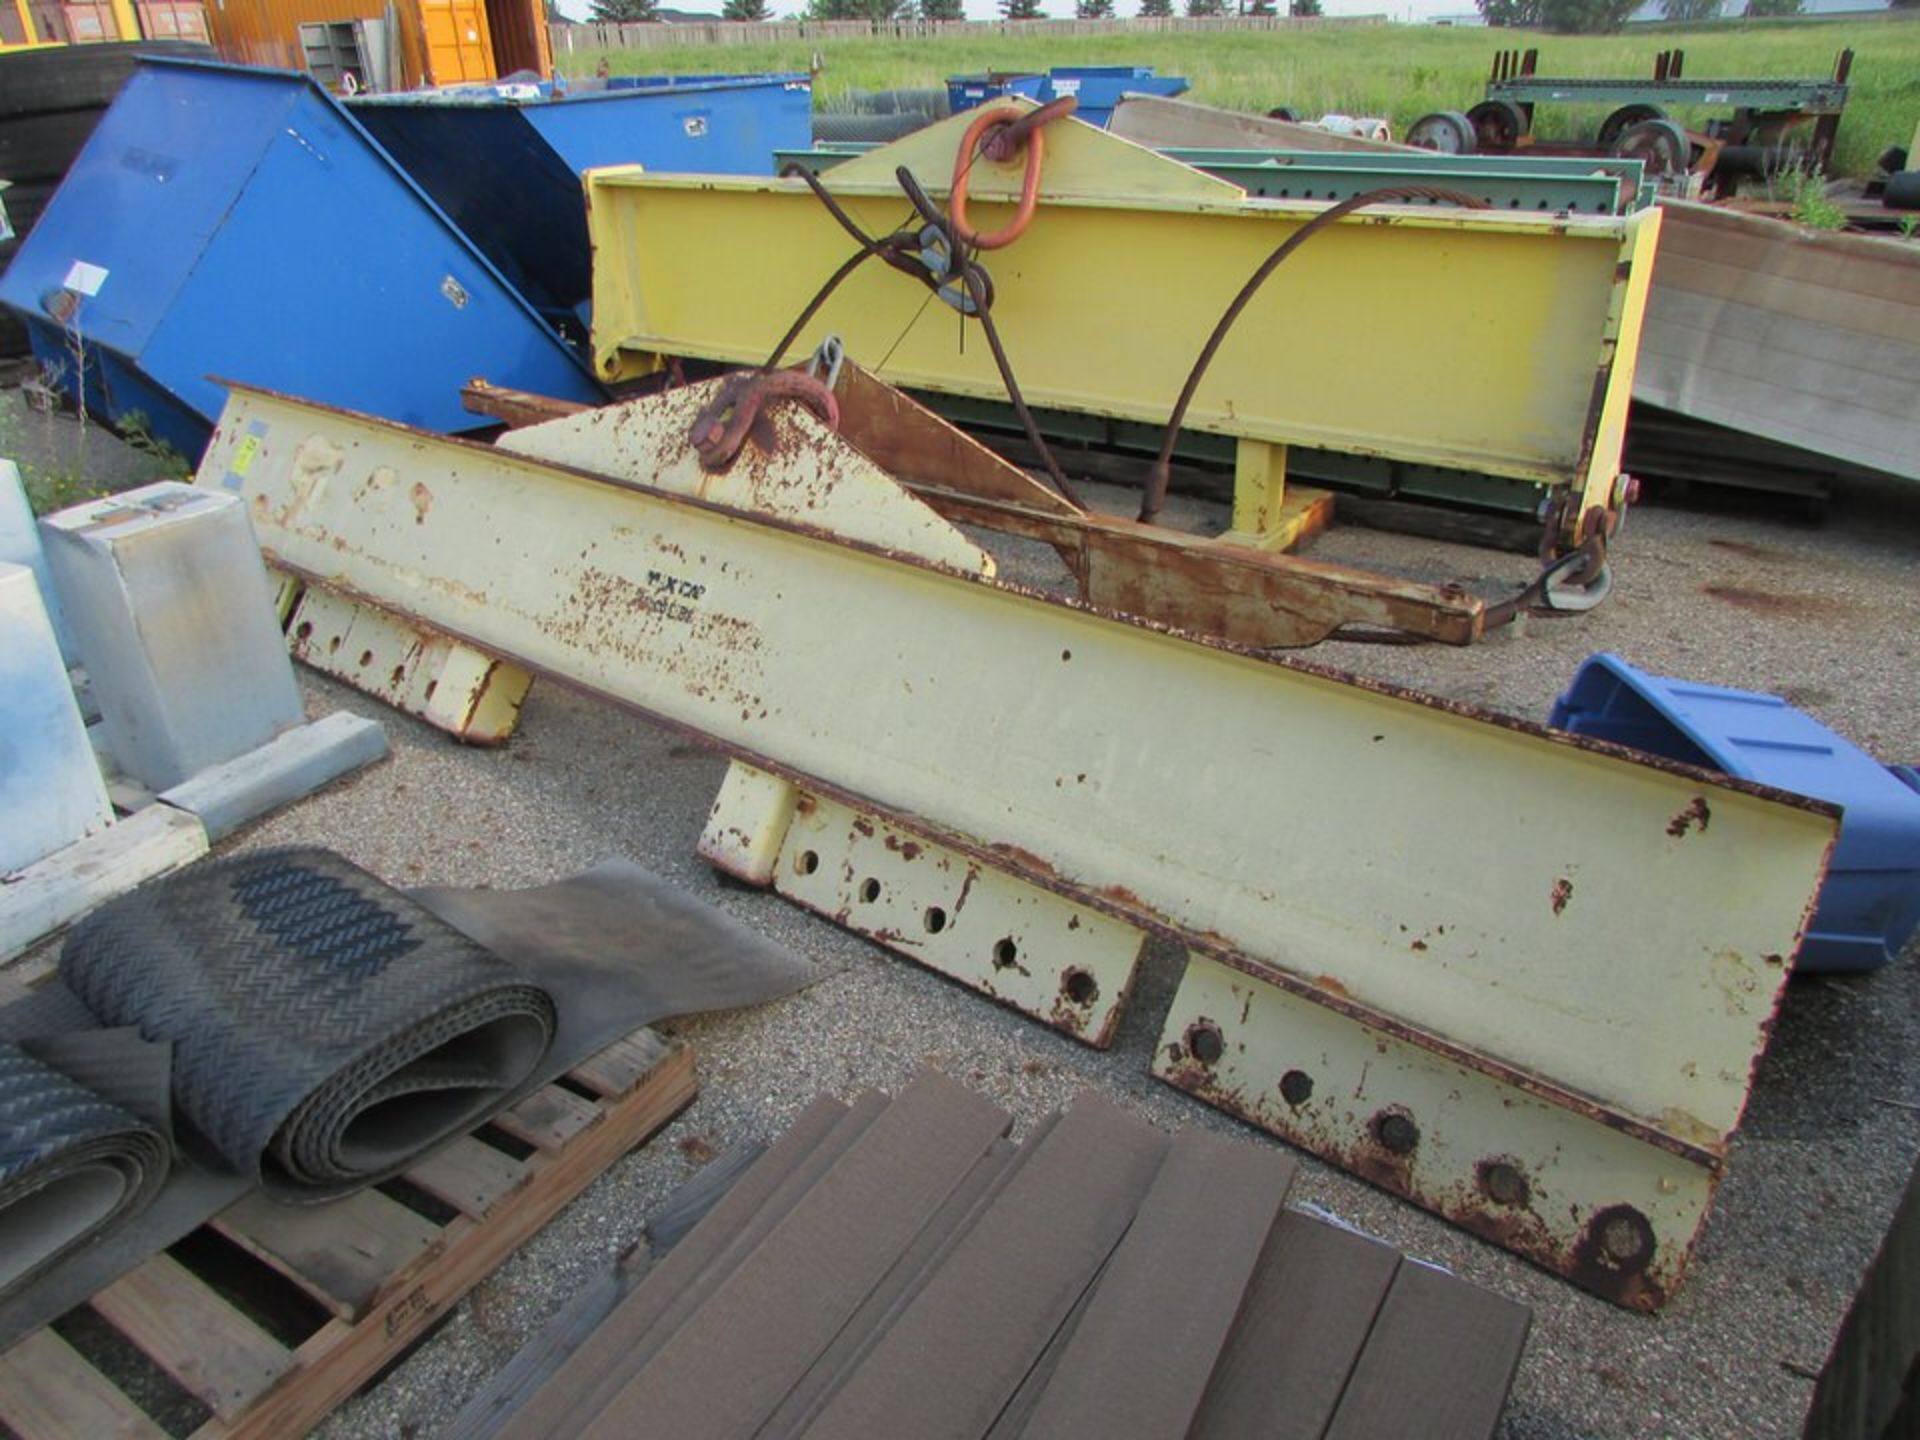 (3) Spreader Bar Lifting Attachments, 14', 11', 134". Loc. 420 Main Ave E, West Fargo, ND 58078 - Image 2 of 4